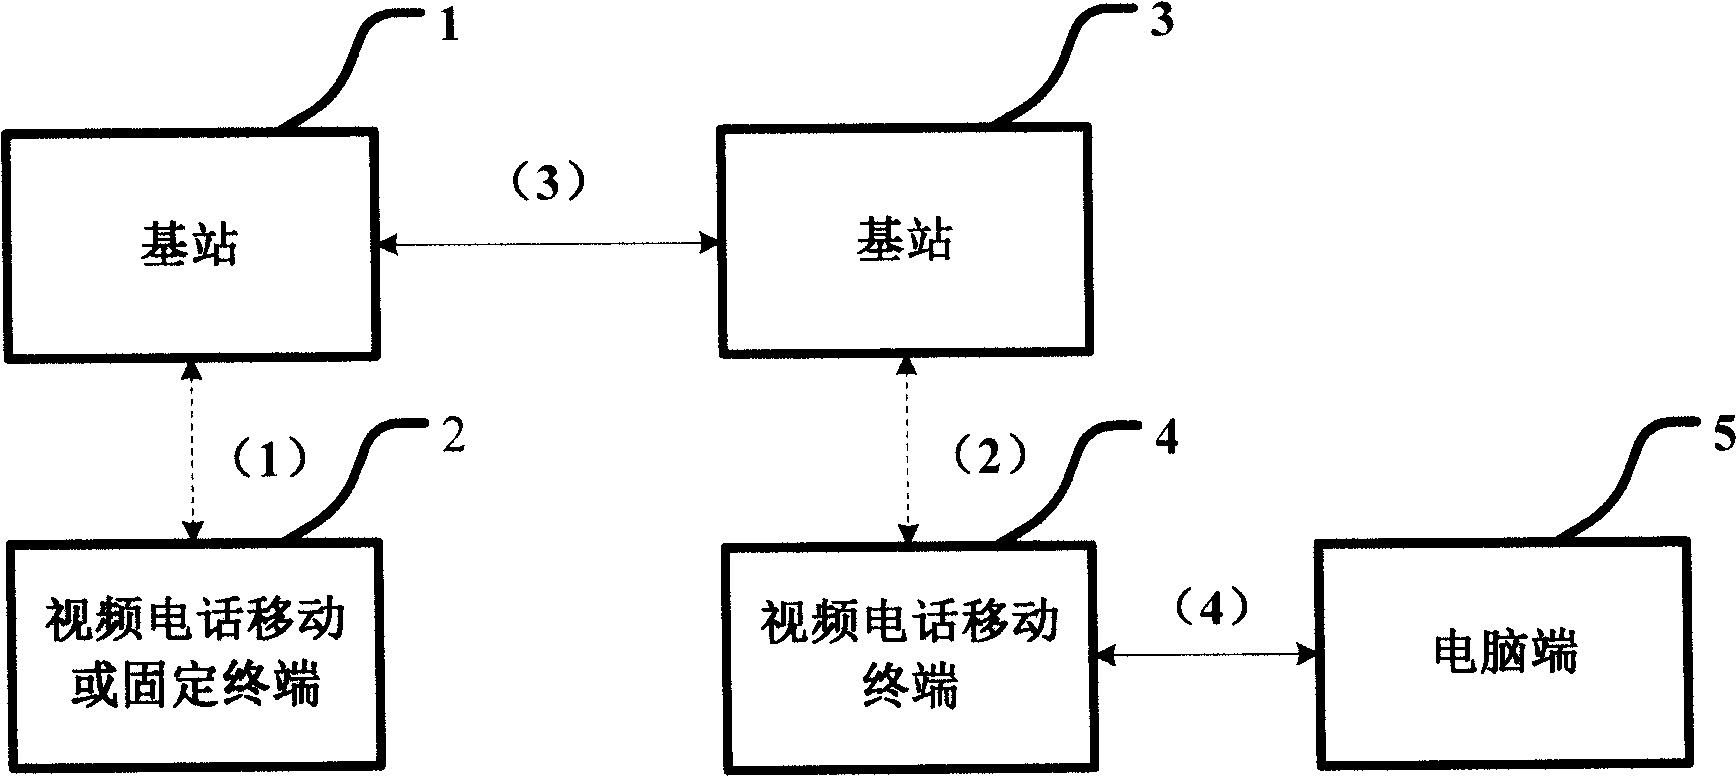 Audio and video transmission system and method for video telephone